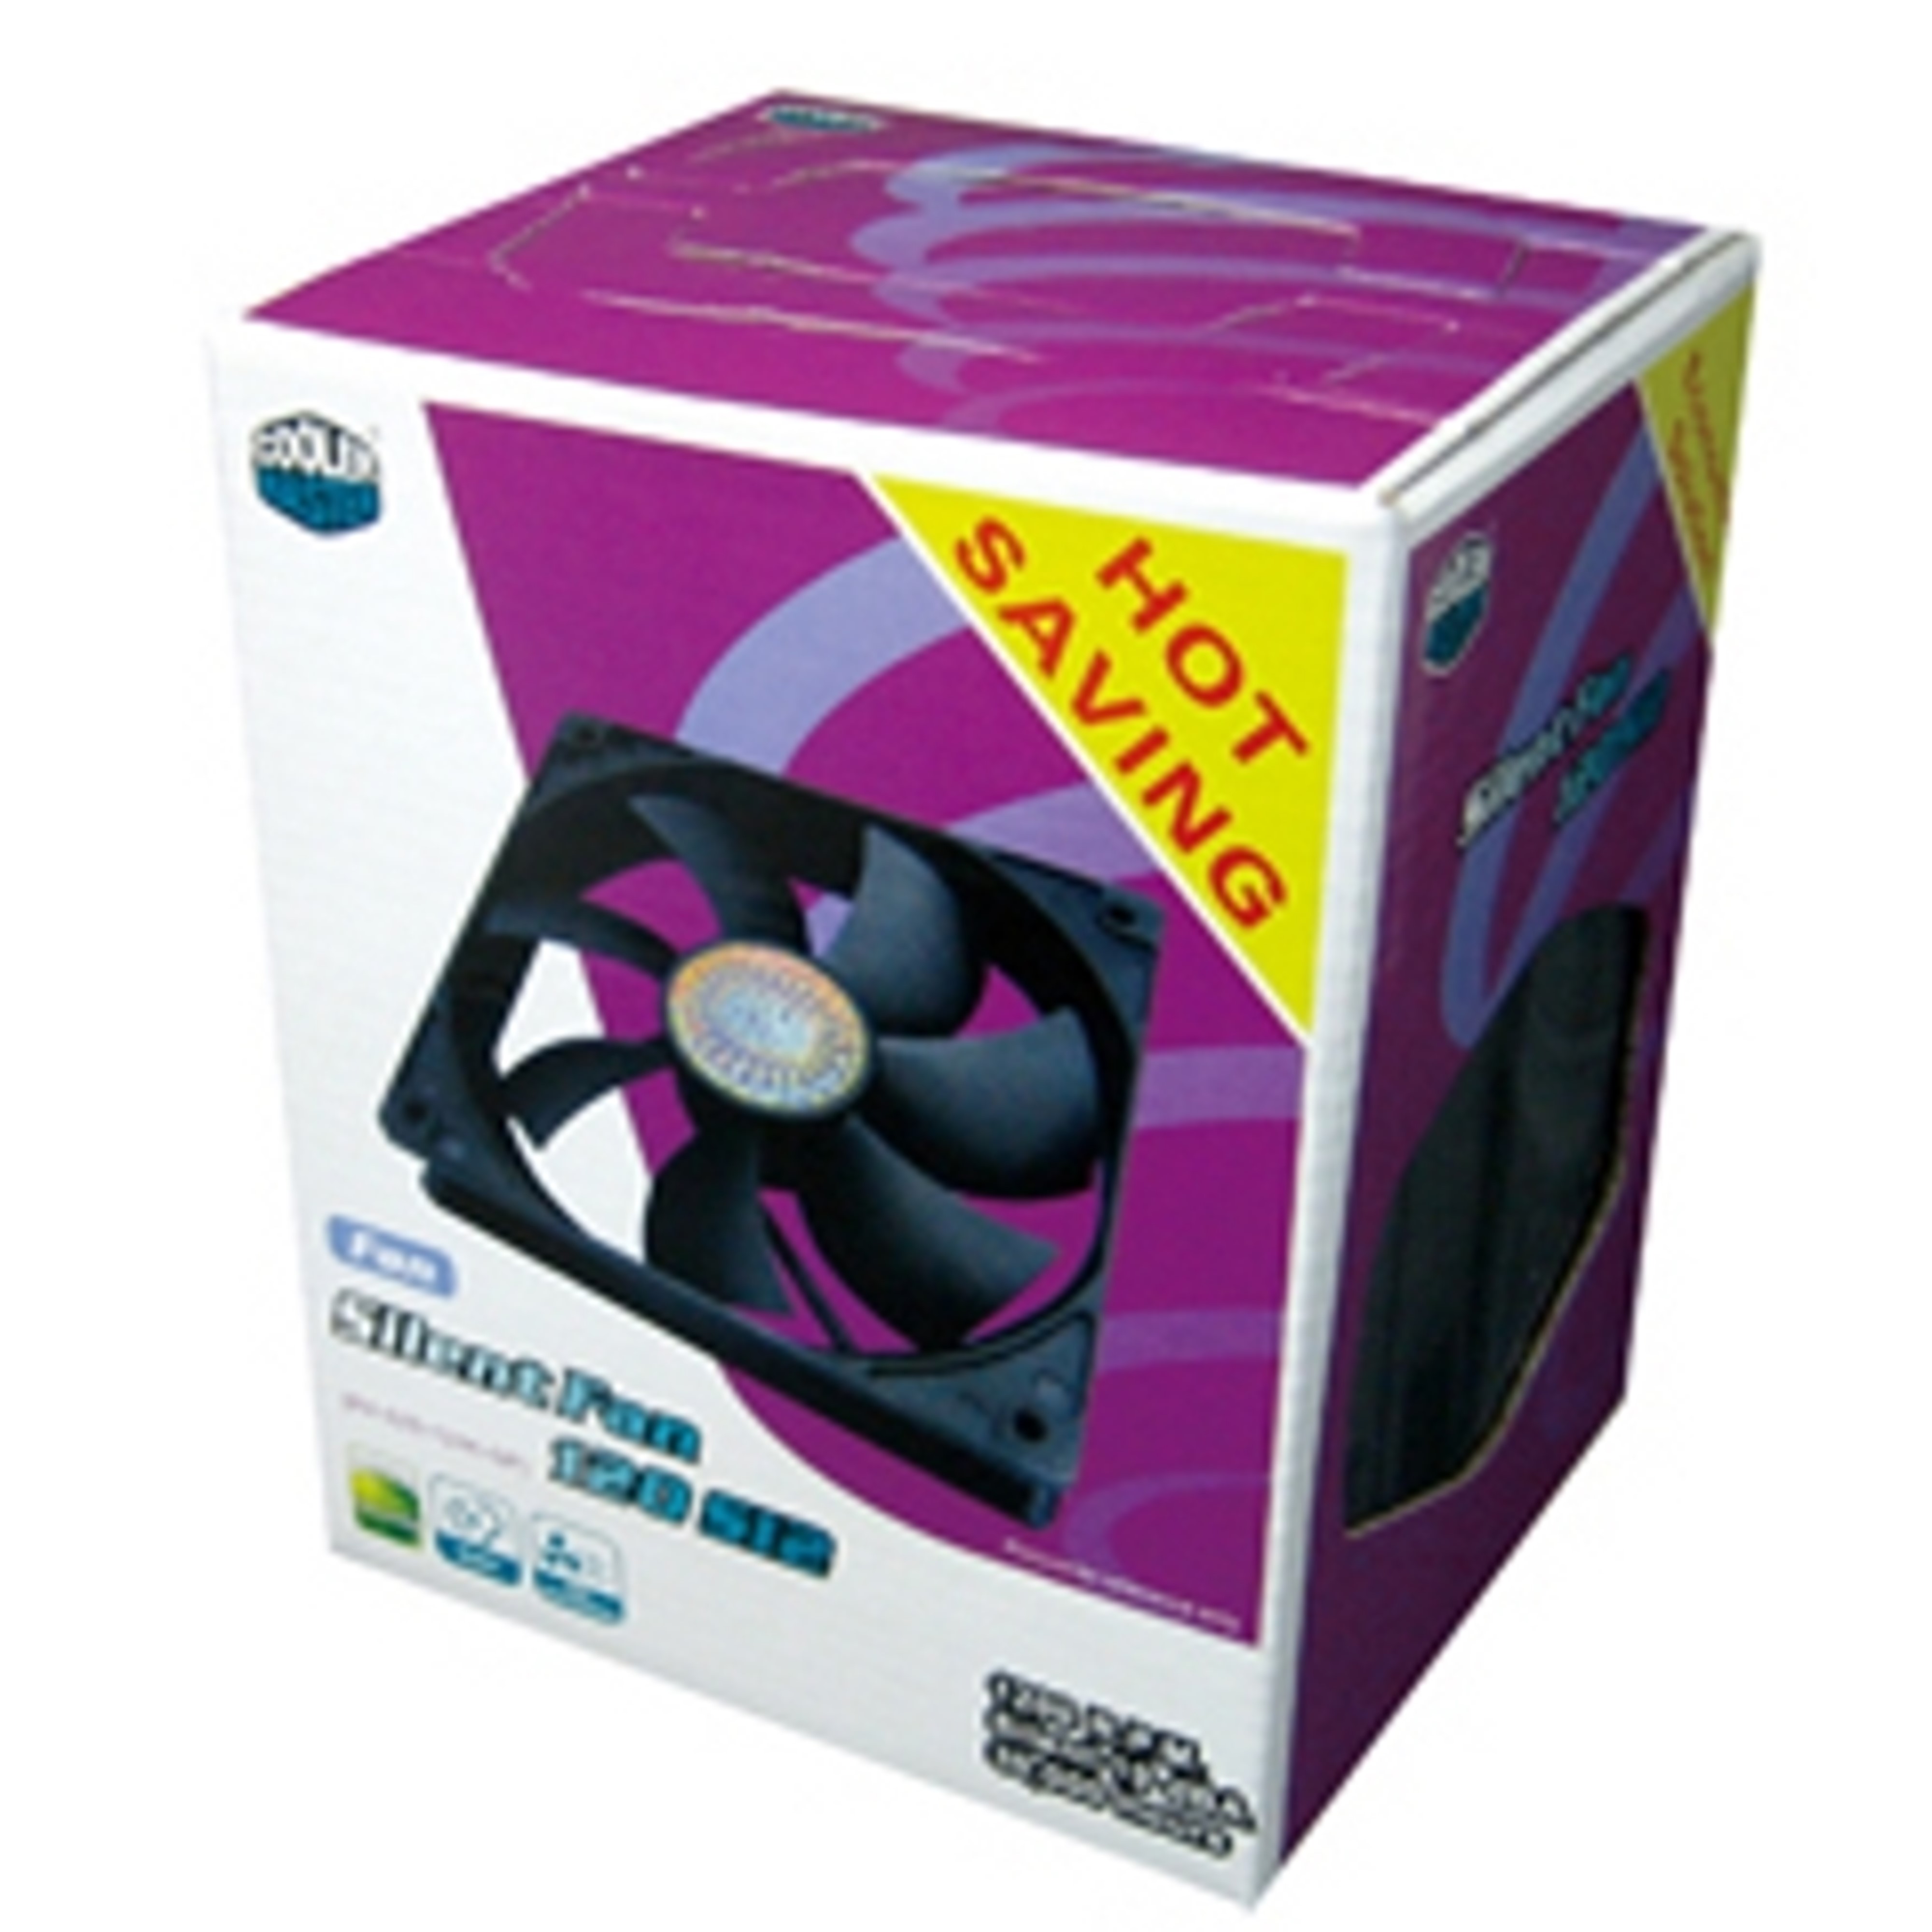 COOLER MASTER 120 120mm PWM Chassis Fan Gale Volume Silent Fan 12025 Chassis Cooler Master 2X 